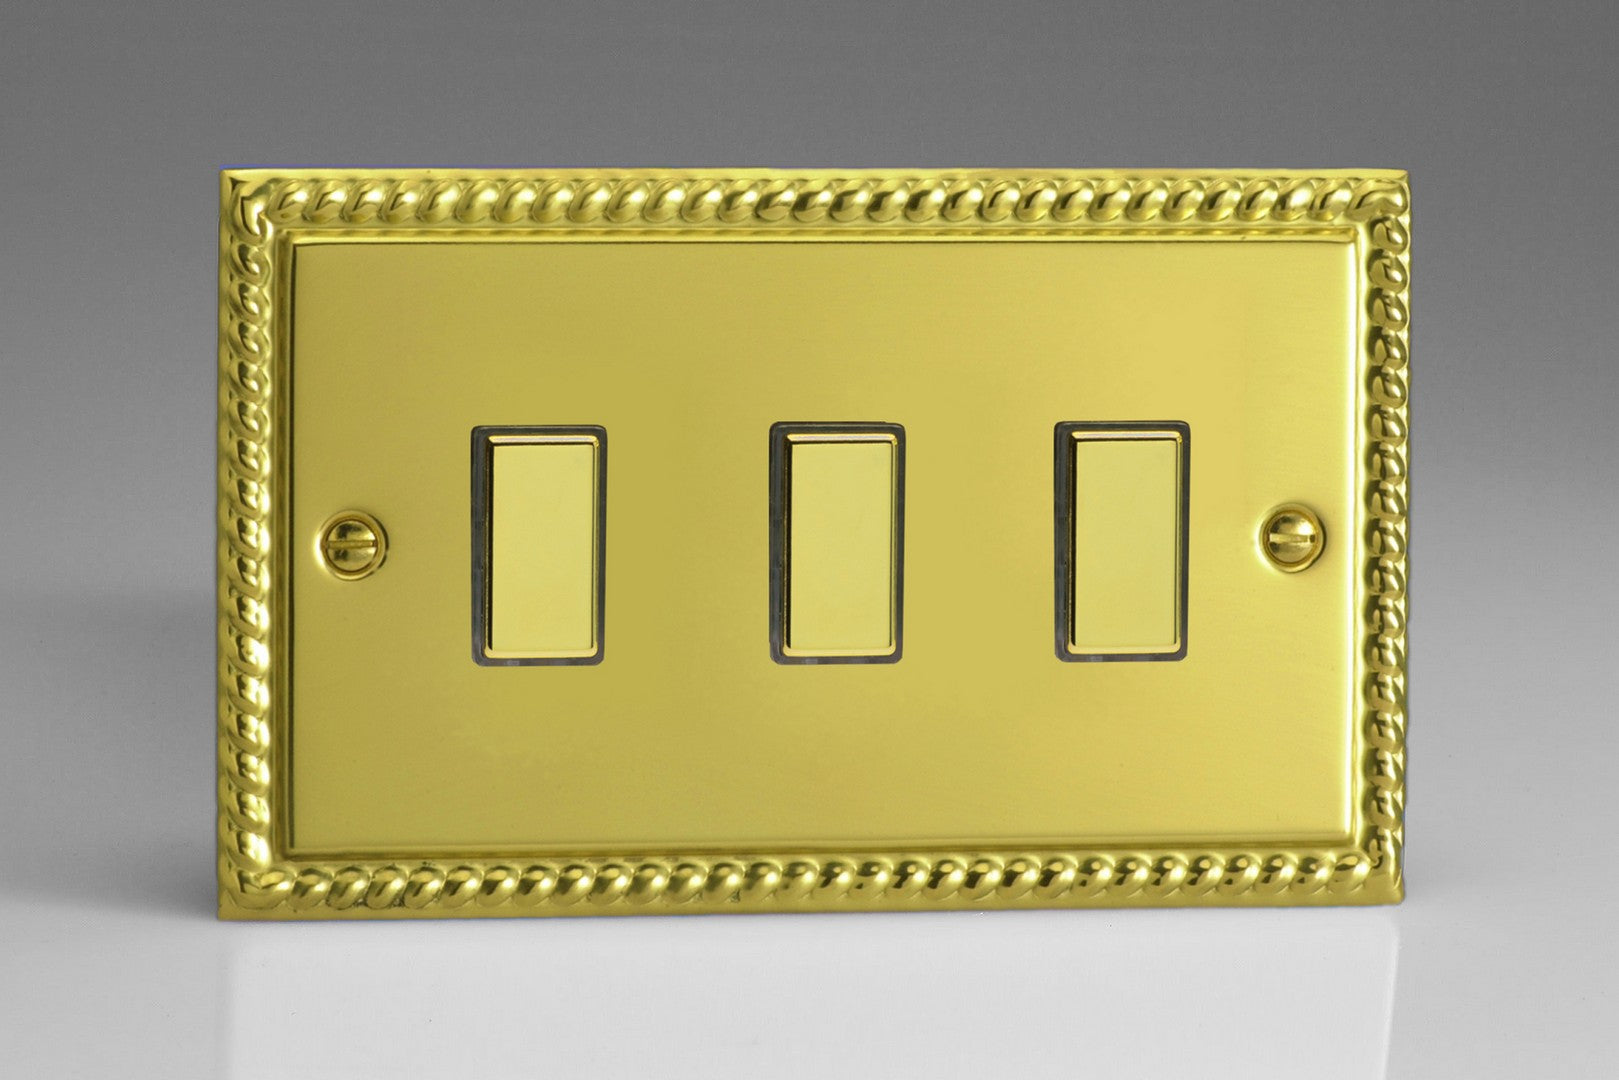 Varilight JGES003 Classic Georgian Brass 3-Gang Tactile Touch Control Dimming Slave for use with Multi-Point Touch or Remote Master on 2-Way Circuits (Twin Plate)